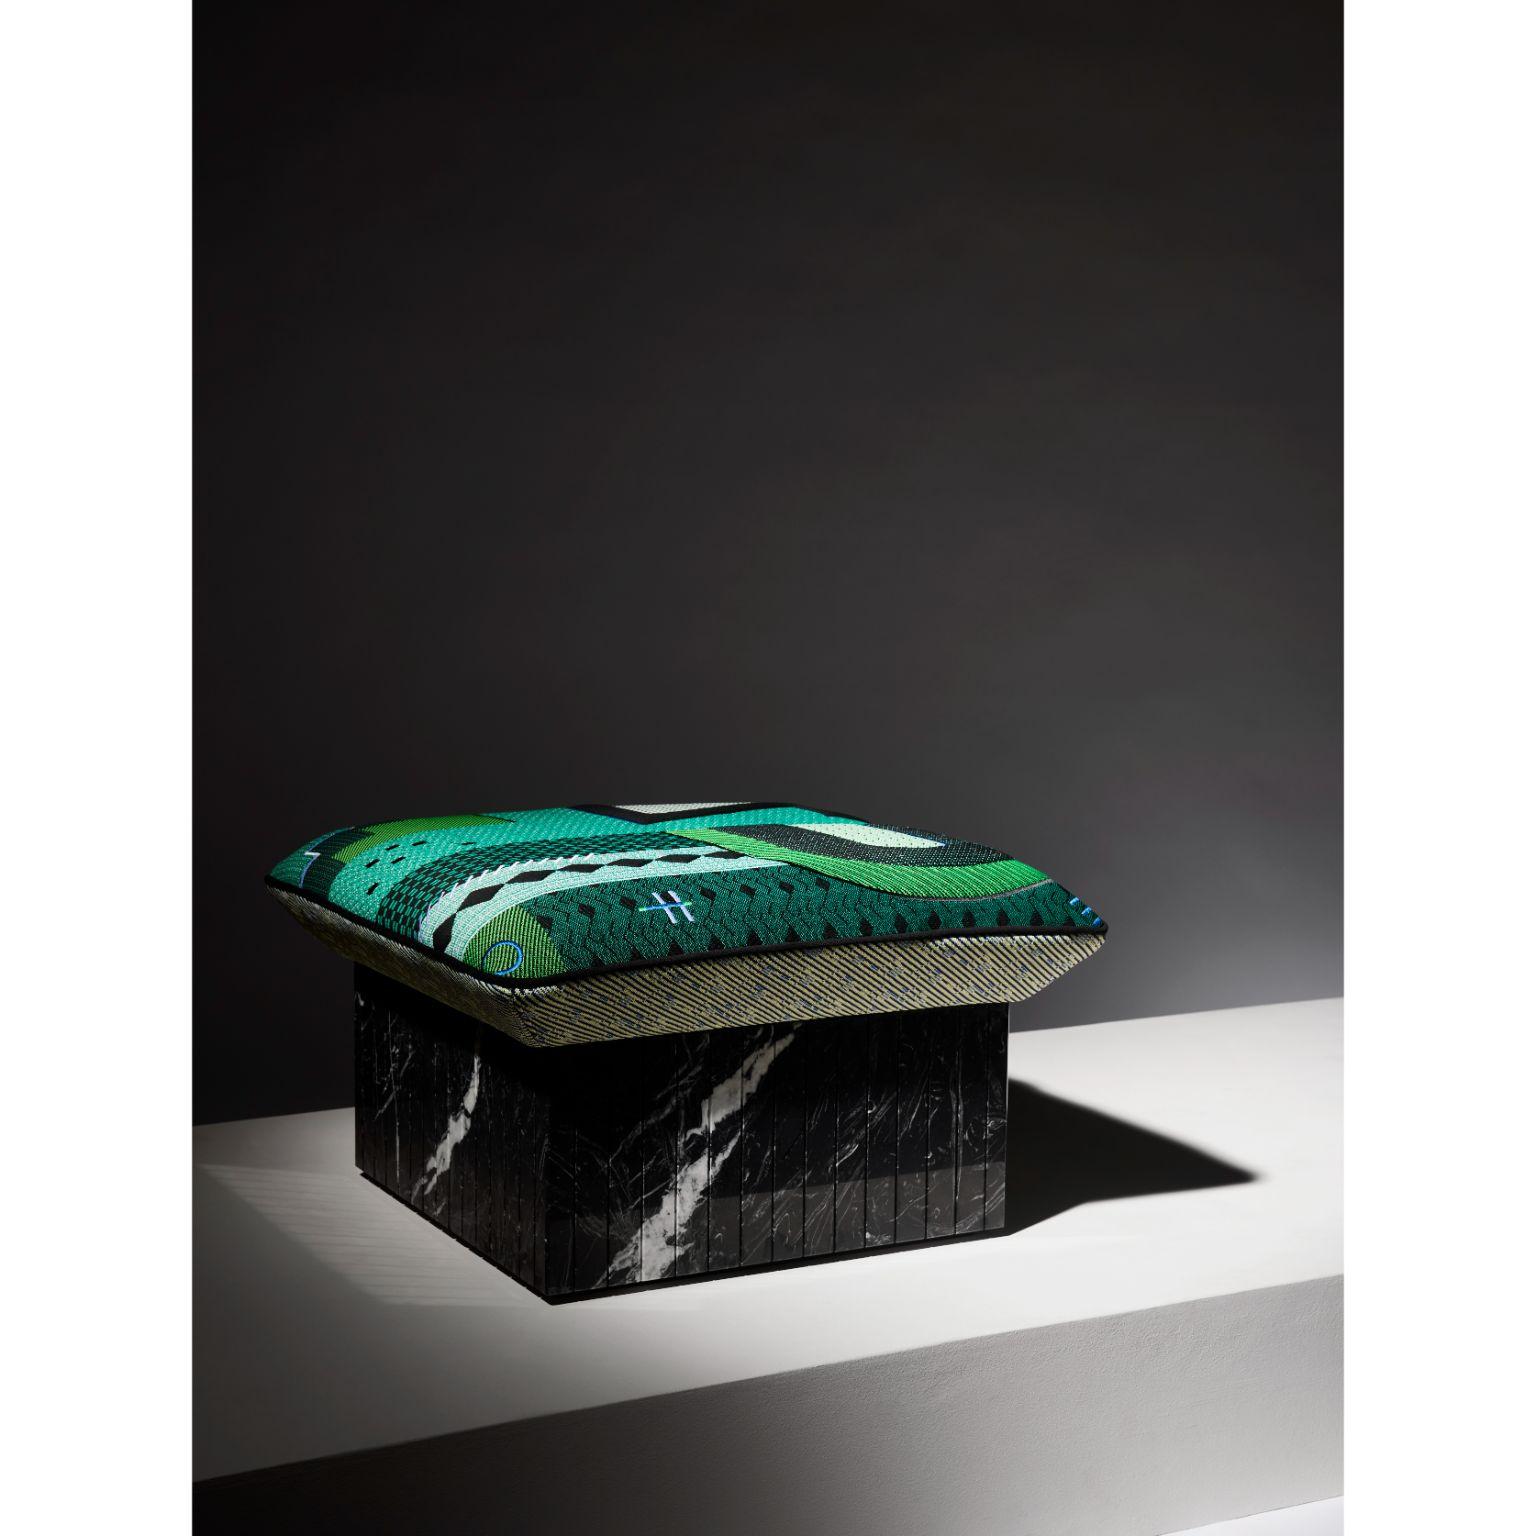 Hopi ottoman green pattern by Marta Bakowski.
Dimensions:D 65 x W 65 x 44 cm.
Materials: marble and fabric.
Also available in different finishes.

HOPI, this new collection of ottomans inspired by Native American Indian culture, is made of a very